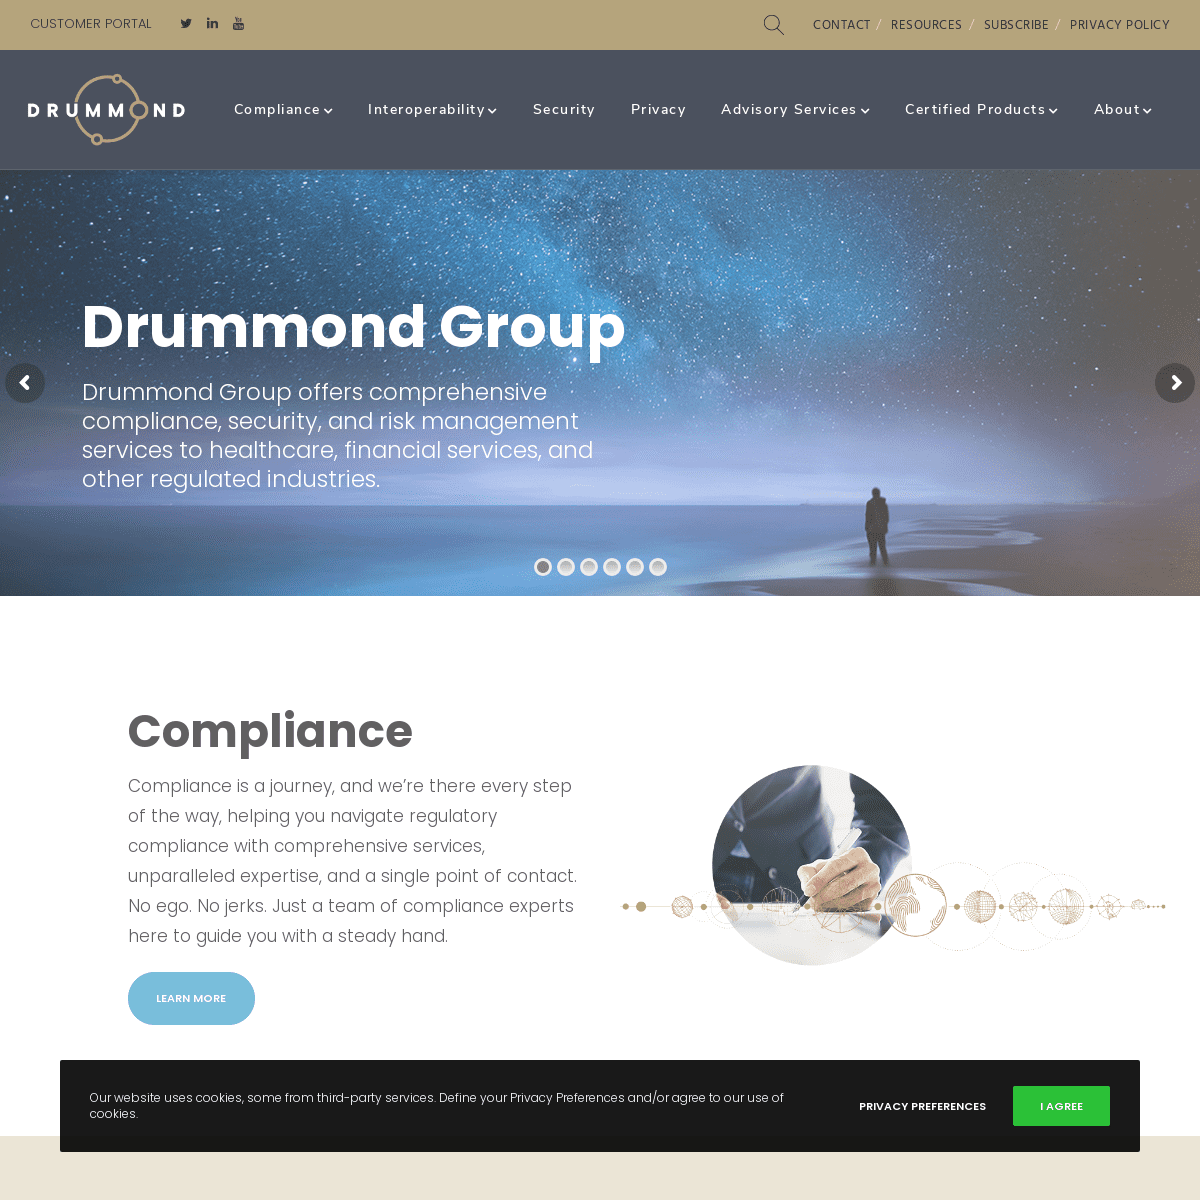 A complete backup of https://drummondgroup.com